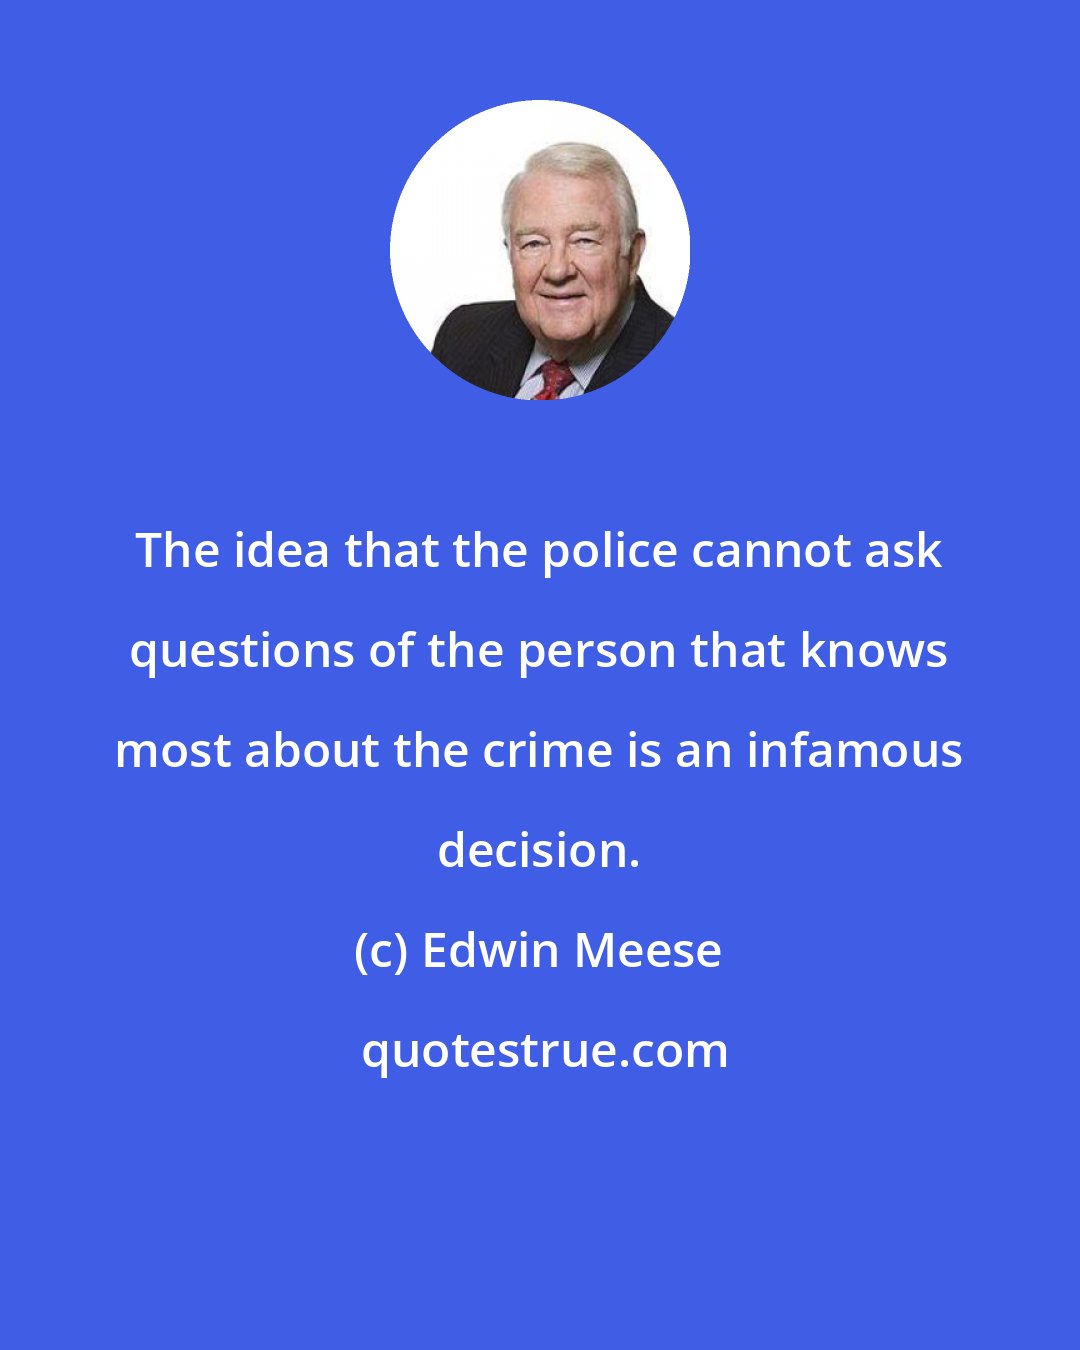 Edwin Meese: The idea that the police cannot ask questions of the person that knows most about the crime is an infamous decision.